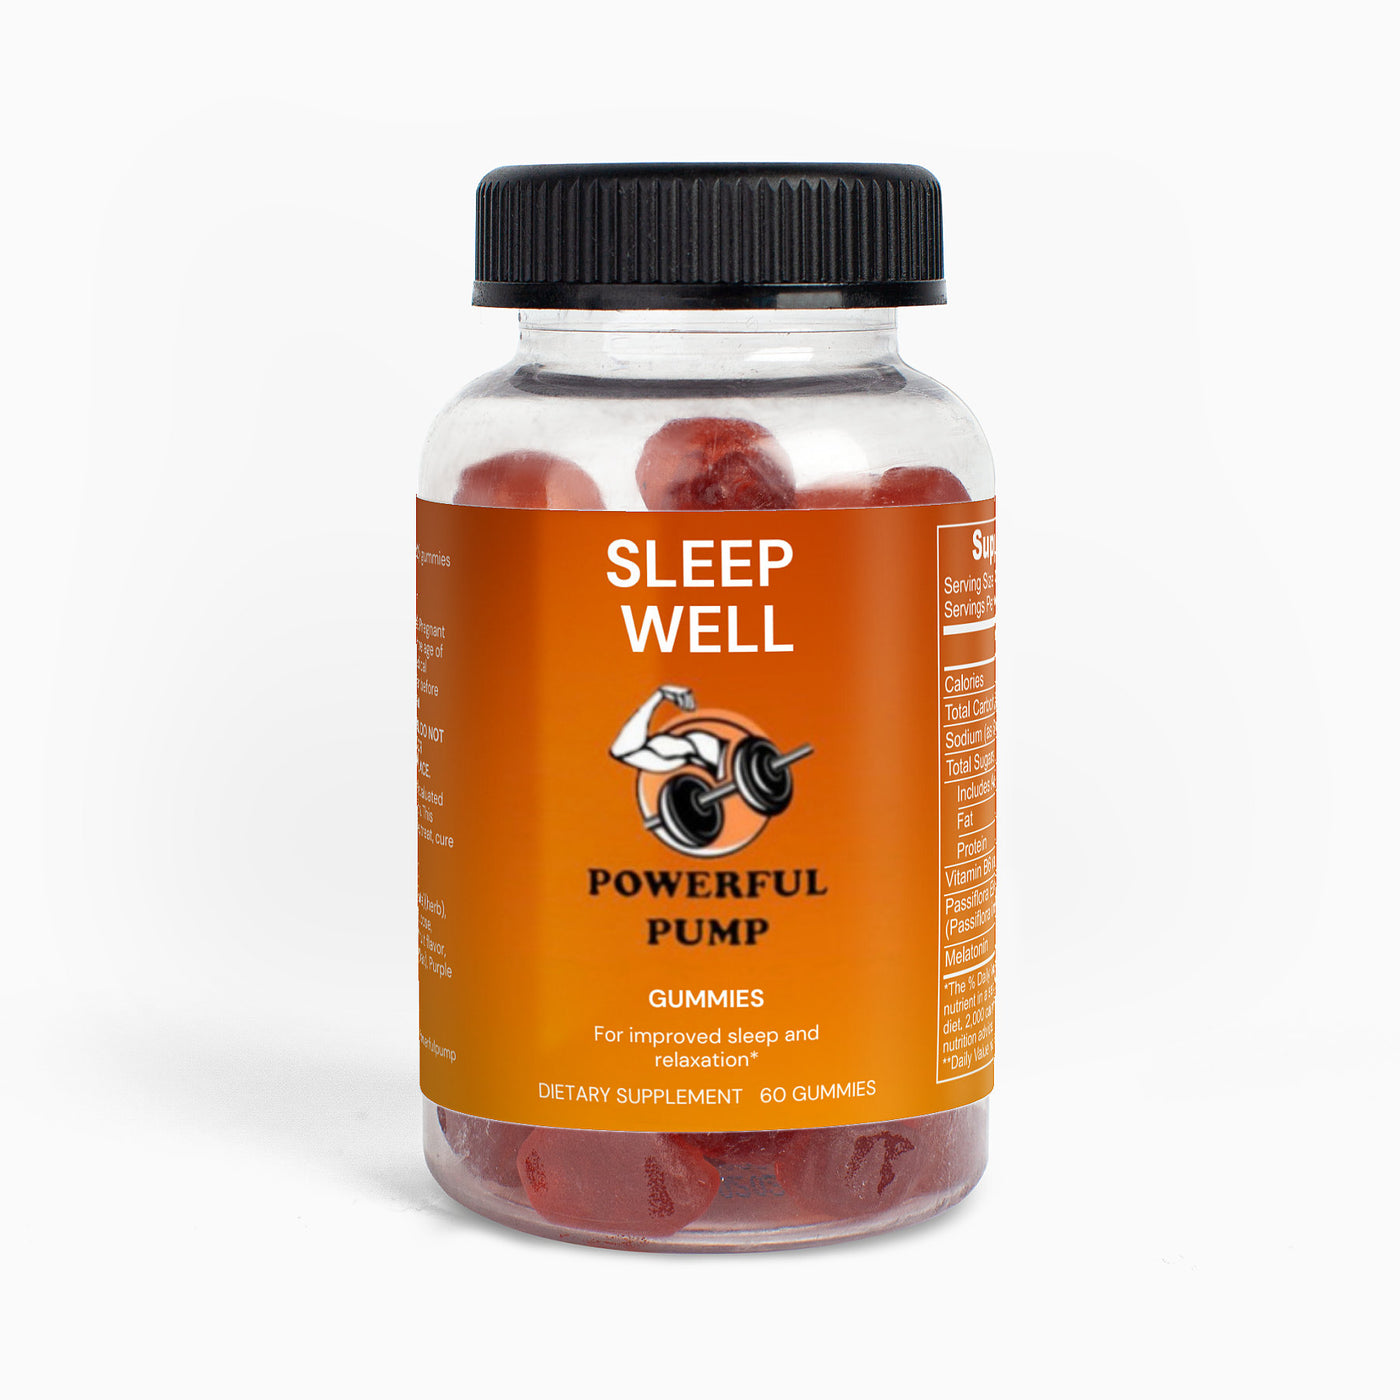 Sleep Well Gummies for Adults - Sweet dreams in every bite, promoting restful sleep and relaxation.